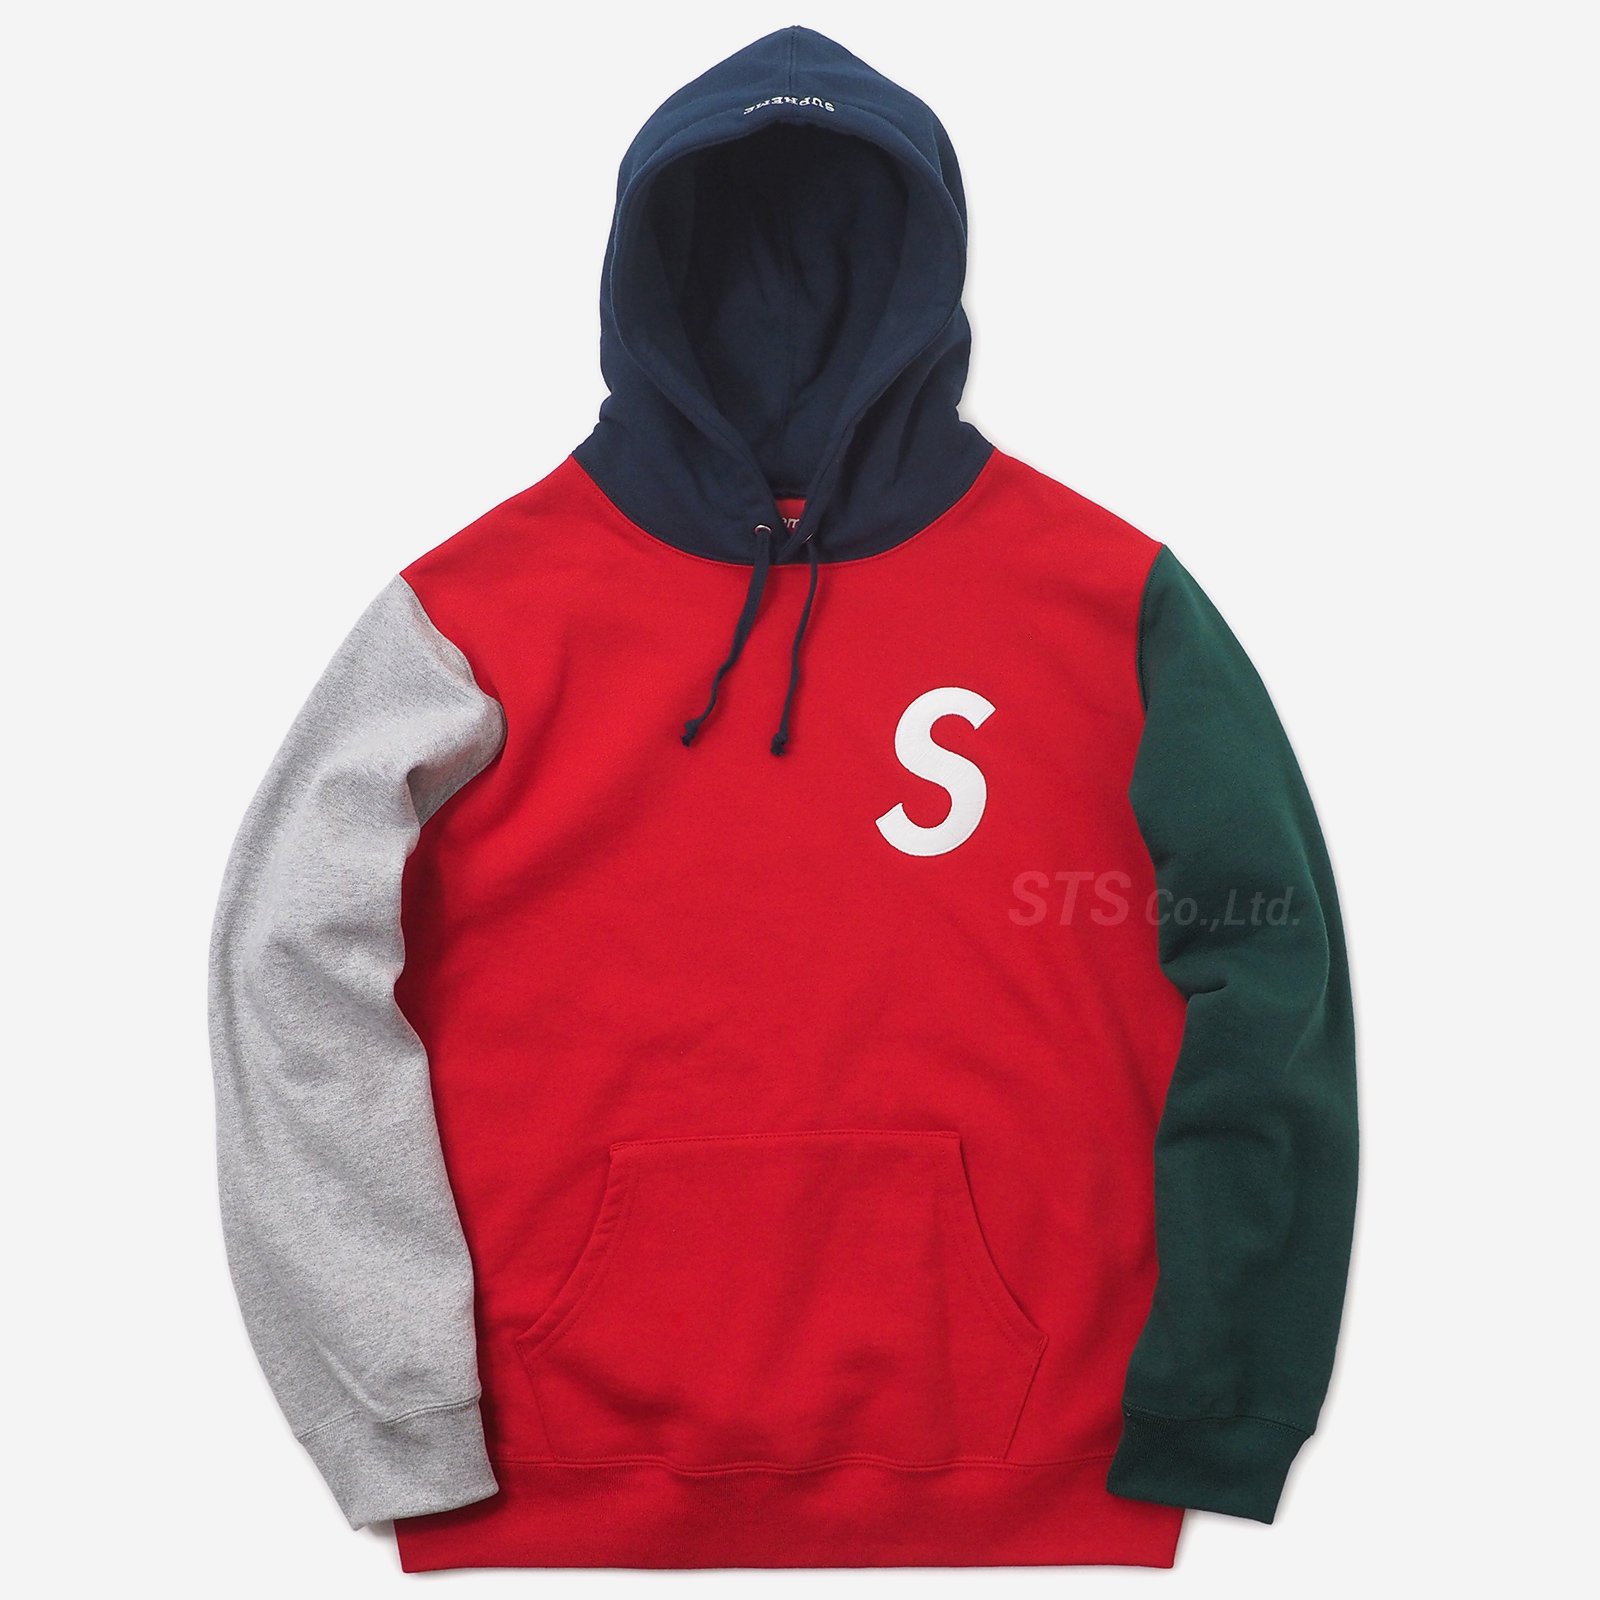 Supreme S Logo Colorblocked Hooded Sweat